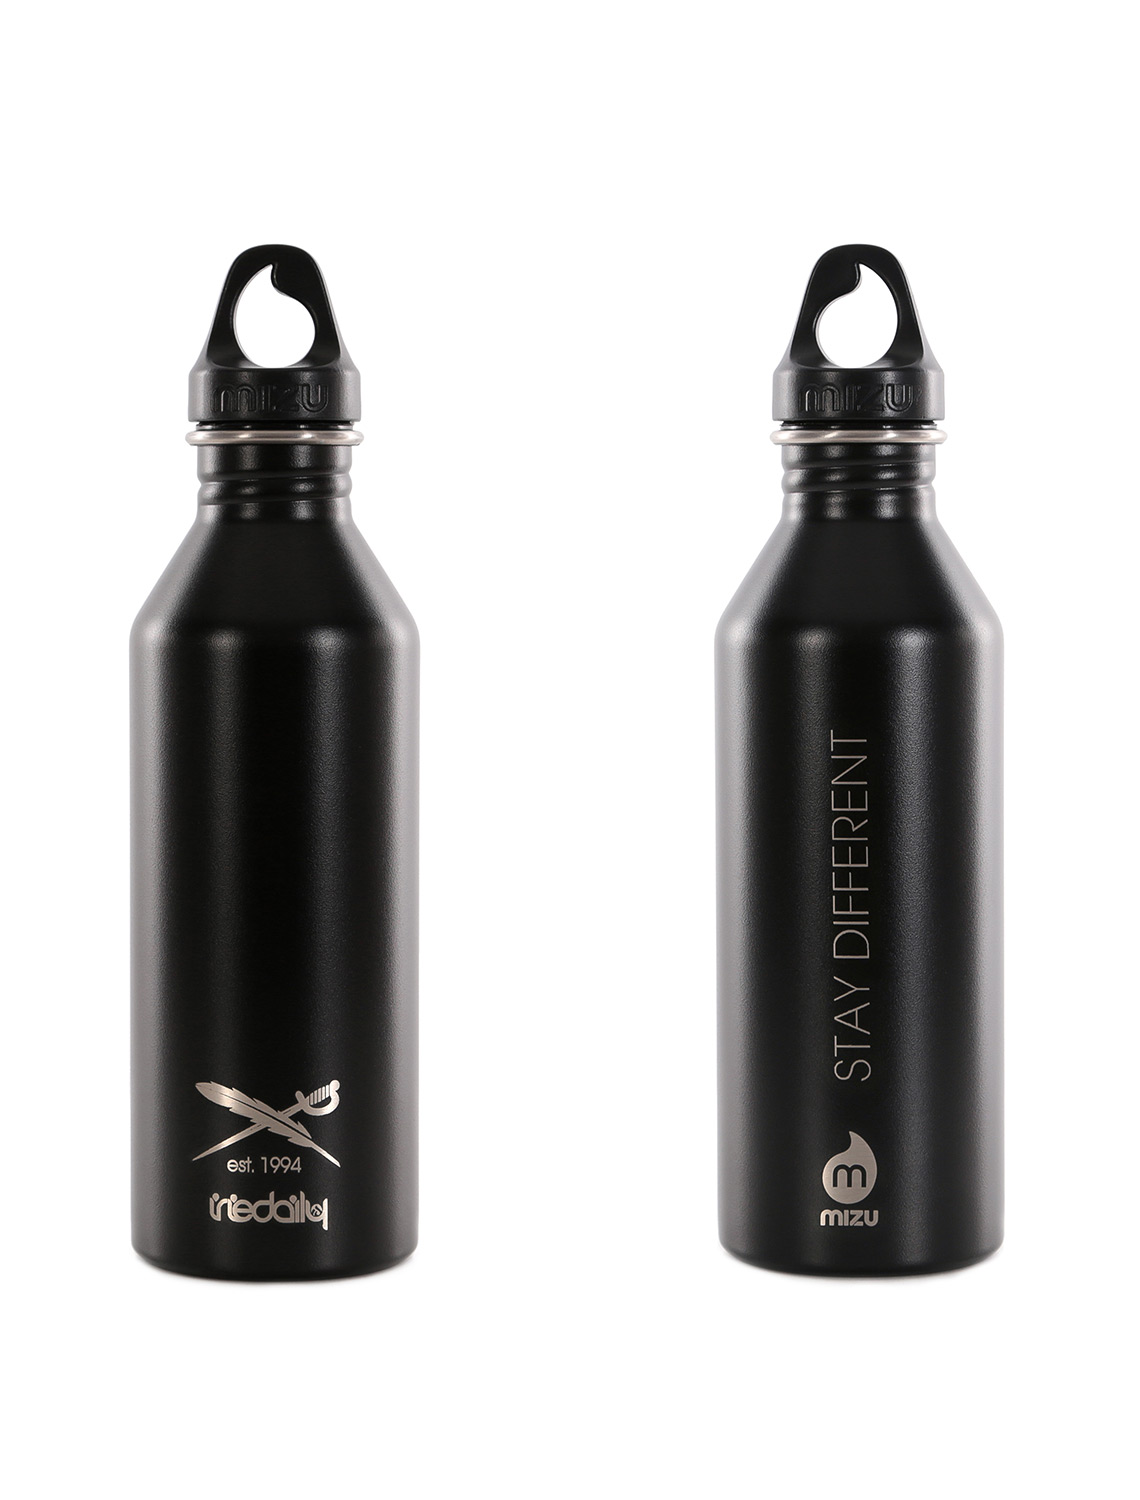 https://www.iriedaily.de/out/pictures/master/product/1/iriedaily-Daily-Flag-Bottle-black-A90B990_700.jpg